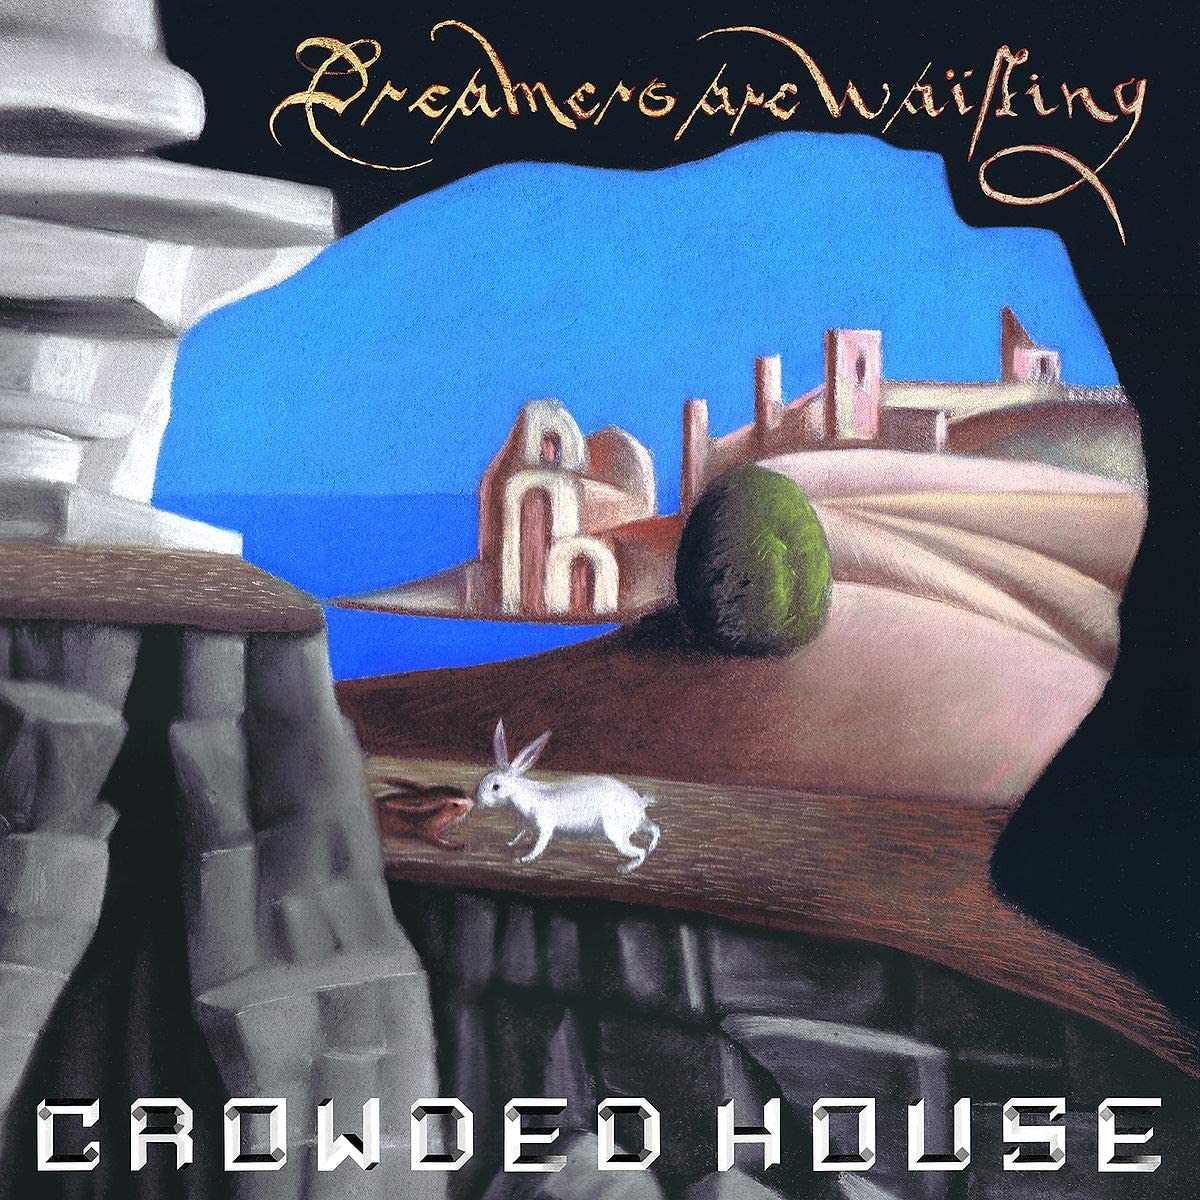 Crowded House – Dreamers Are Waiting (2021) [FLAC 24bit/96kHz]